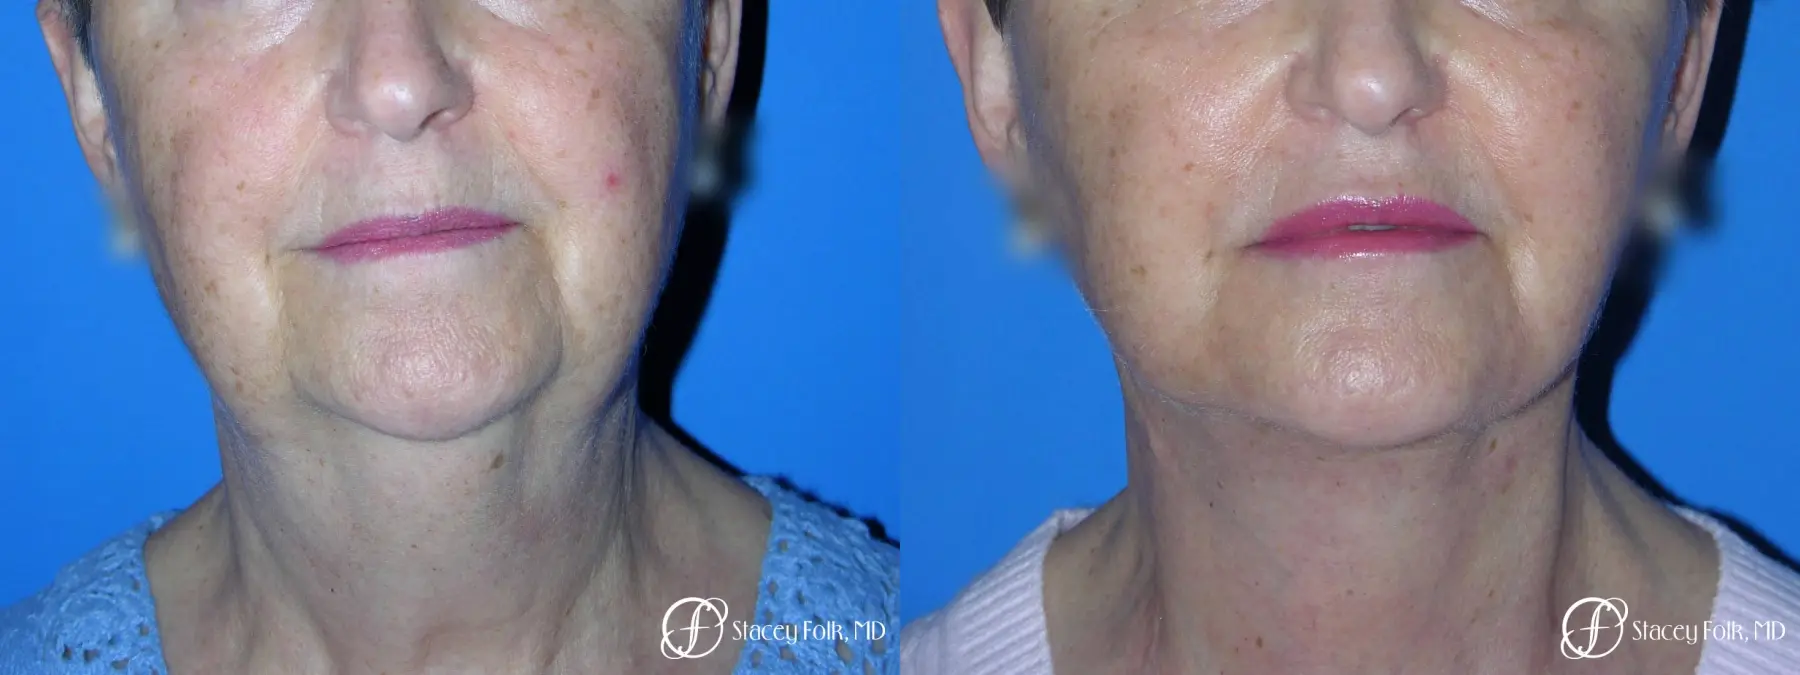 Denver Facial Rejuvenation Face Lift and Fat Injections 7130 - Before and After 2